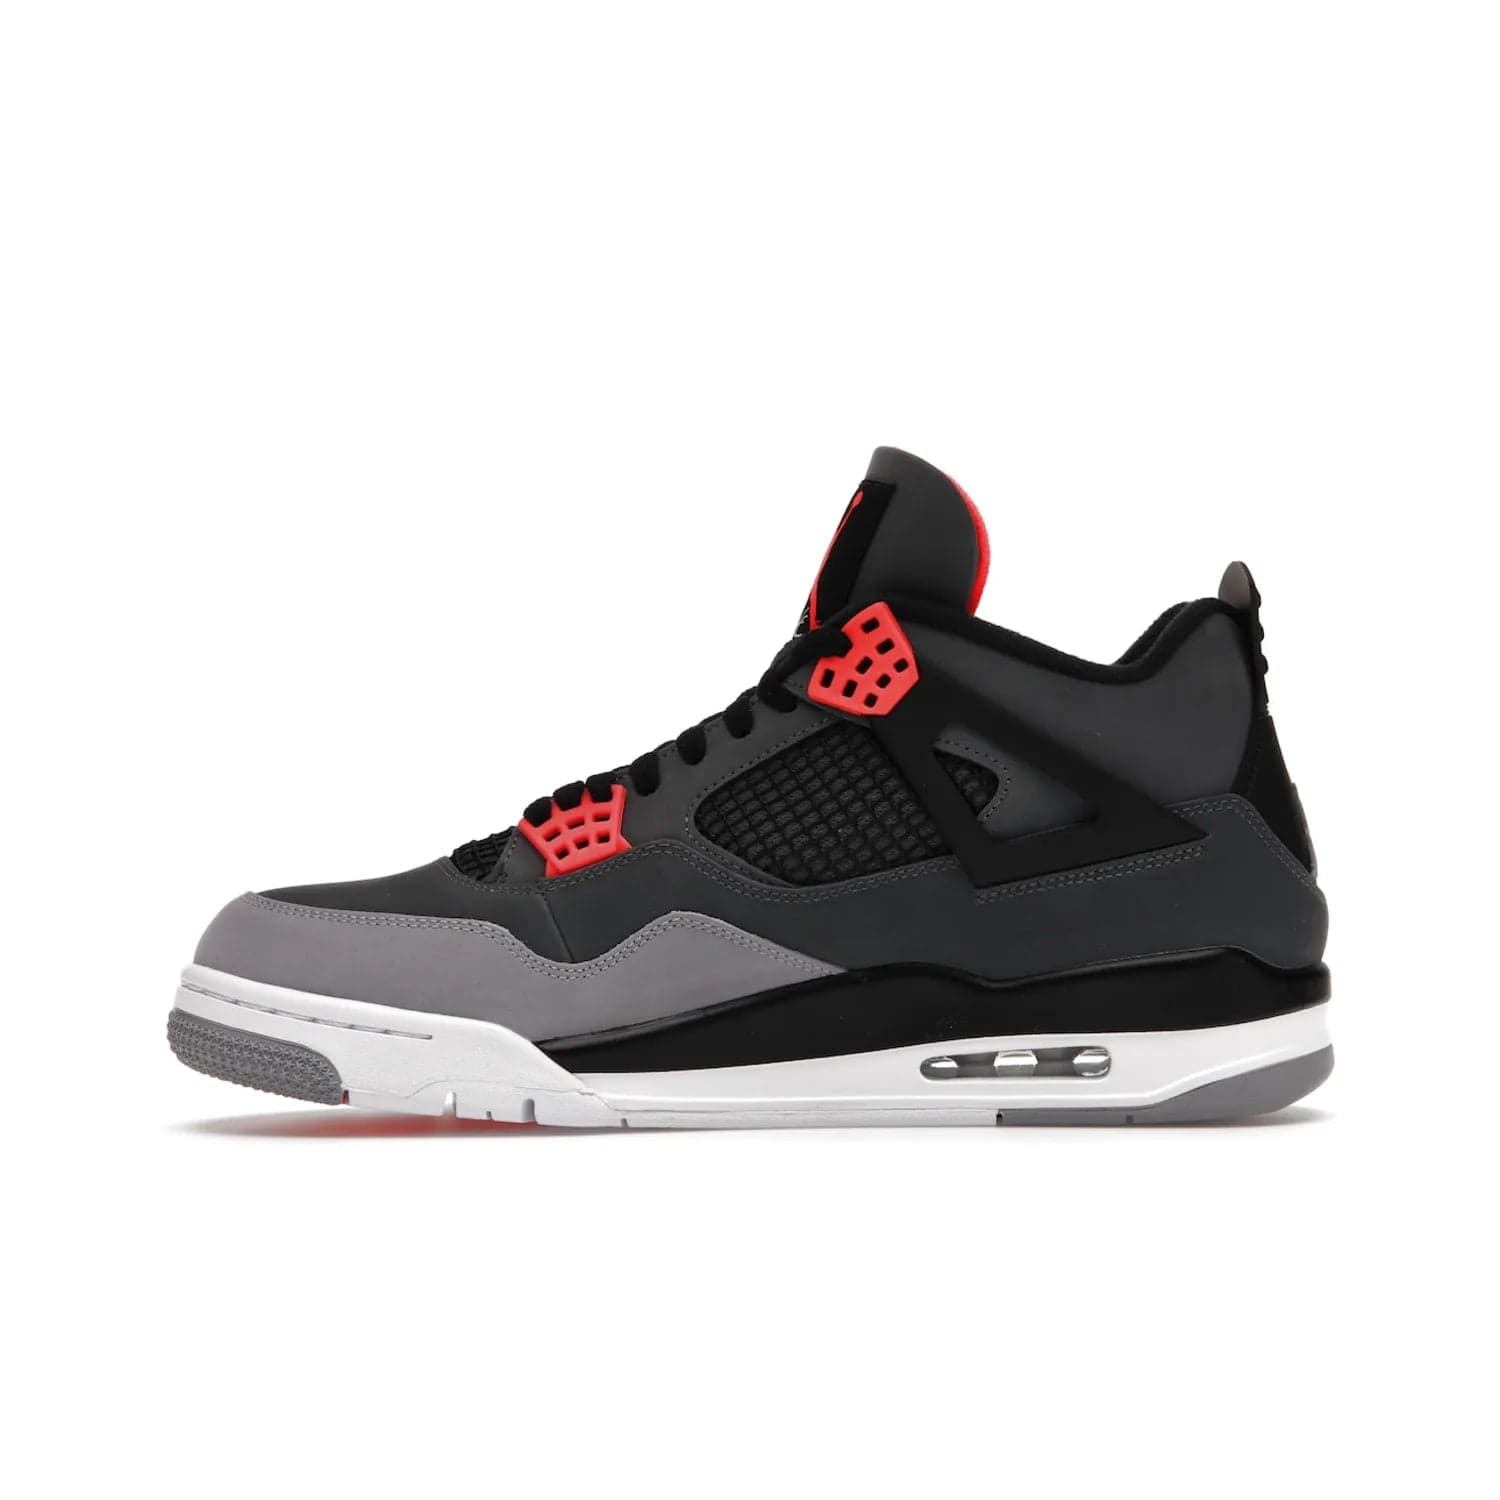 Jordan 4 Retro Infrared - Image 19 - Only at www.BallersClubKickz.com - Introducing the classic & timeless Air Jordan 4 Infrared. Durabuck upper, TPU mesh inserts, tech straps & heel tabs in dark grey and infrared accents. White sole with visible Air units. Out June 15, 2022. Get your pair now!